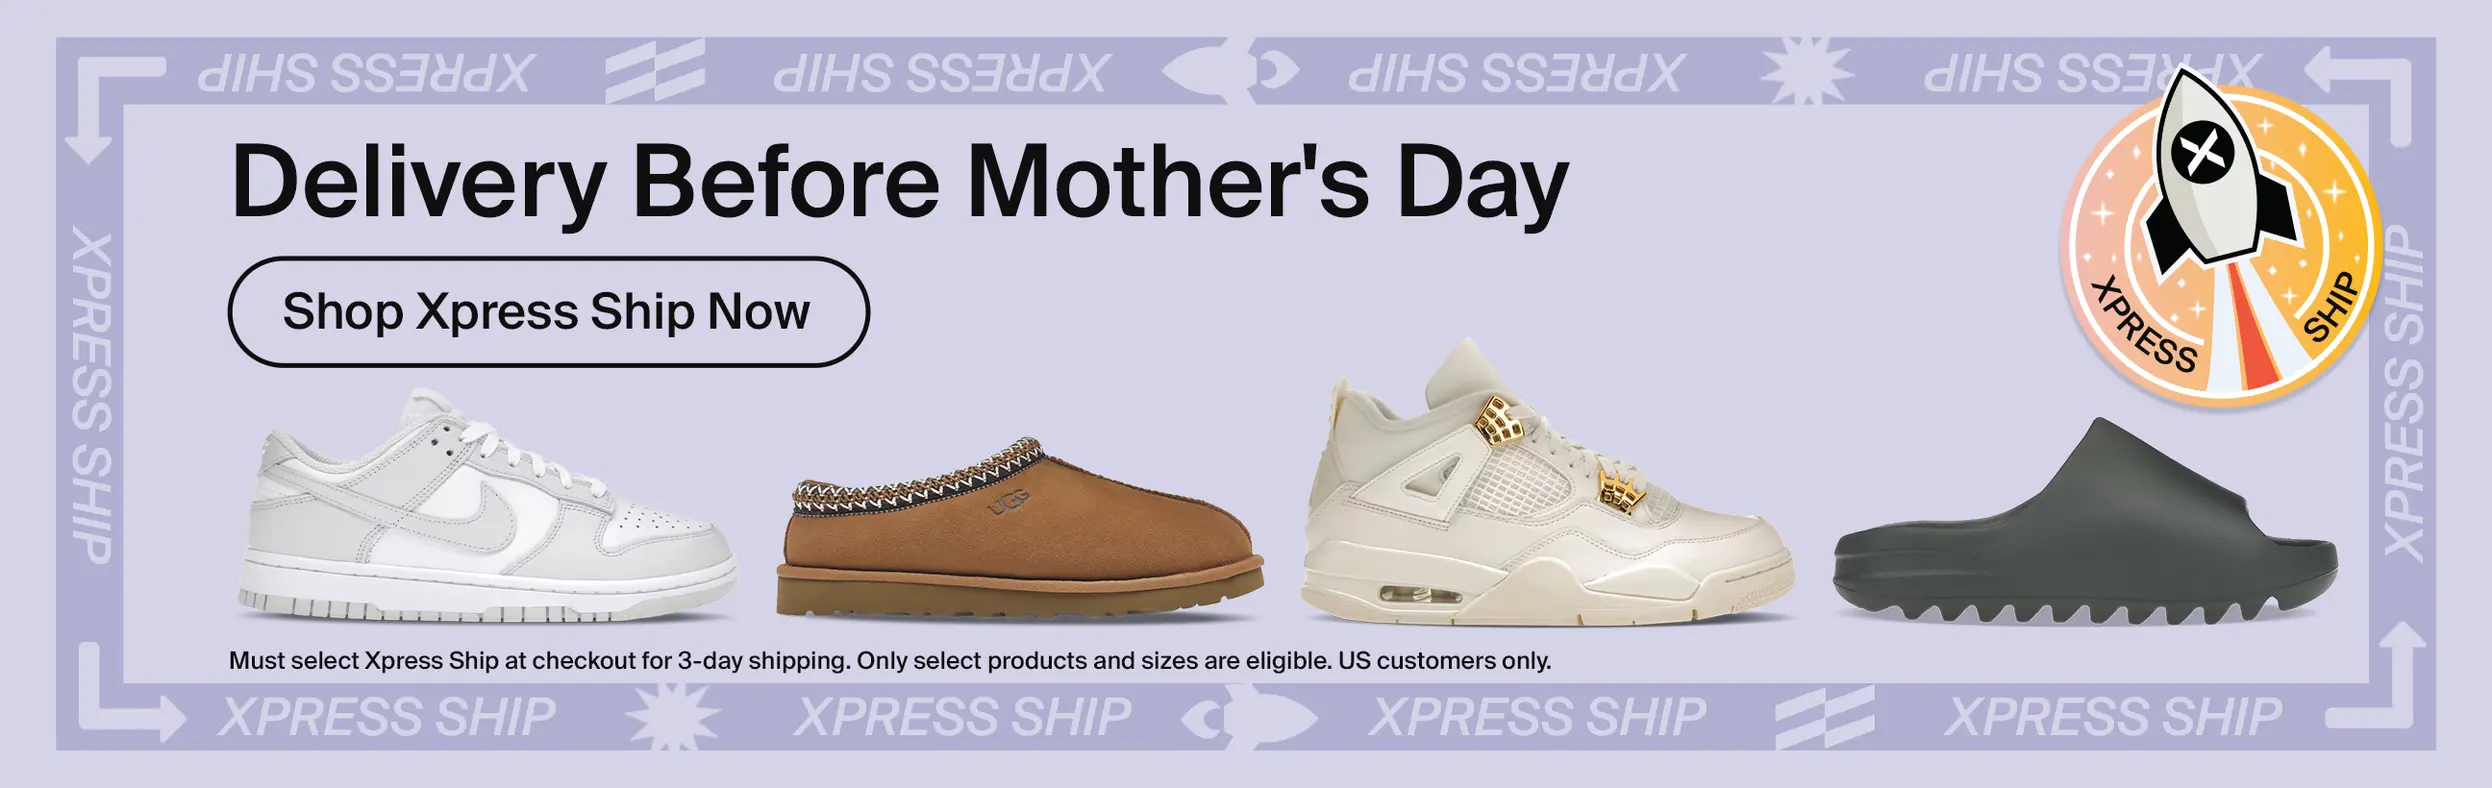 Mother_s-Day-Xpress-Ship-SneakersPrimary_Desktop.png